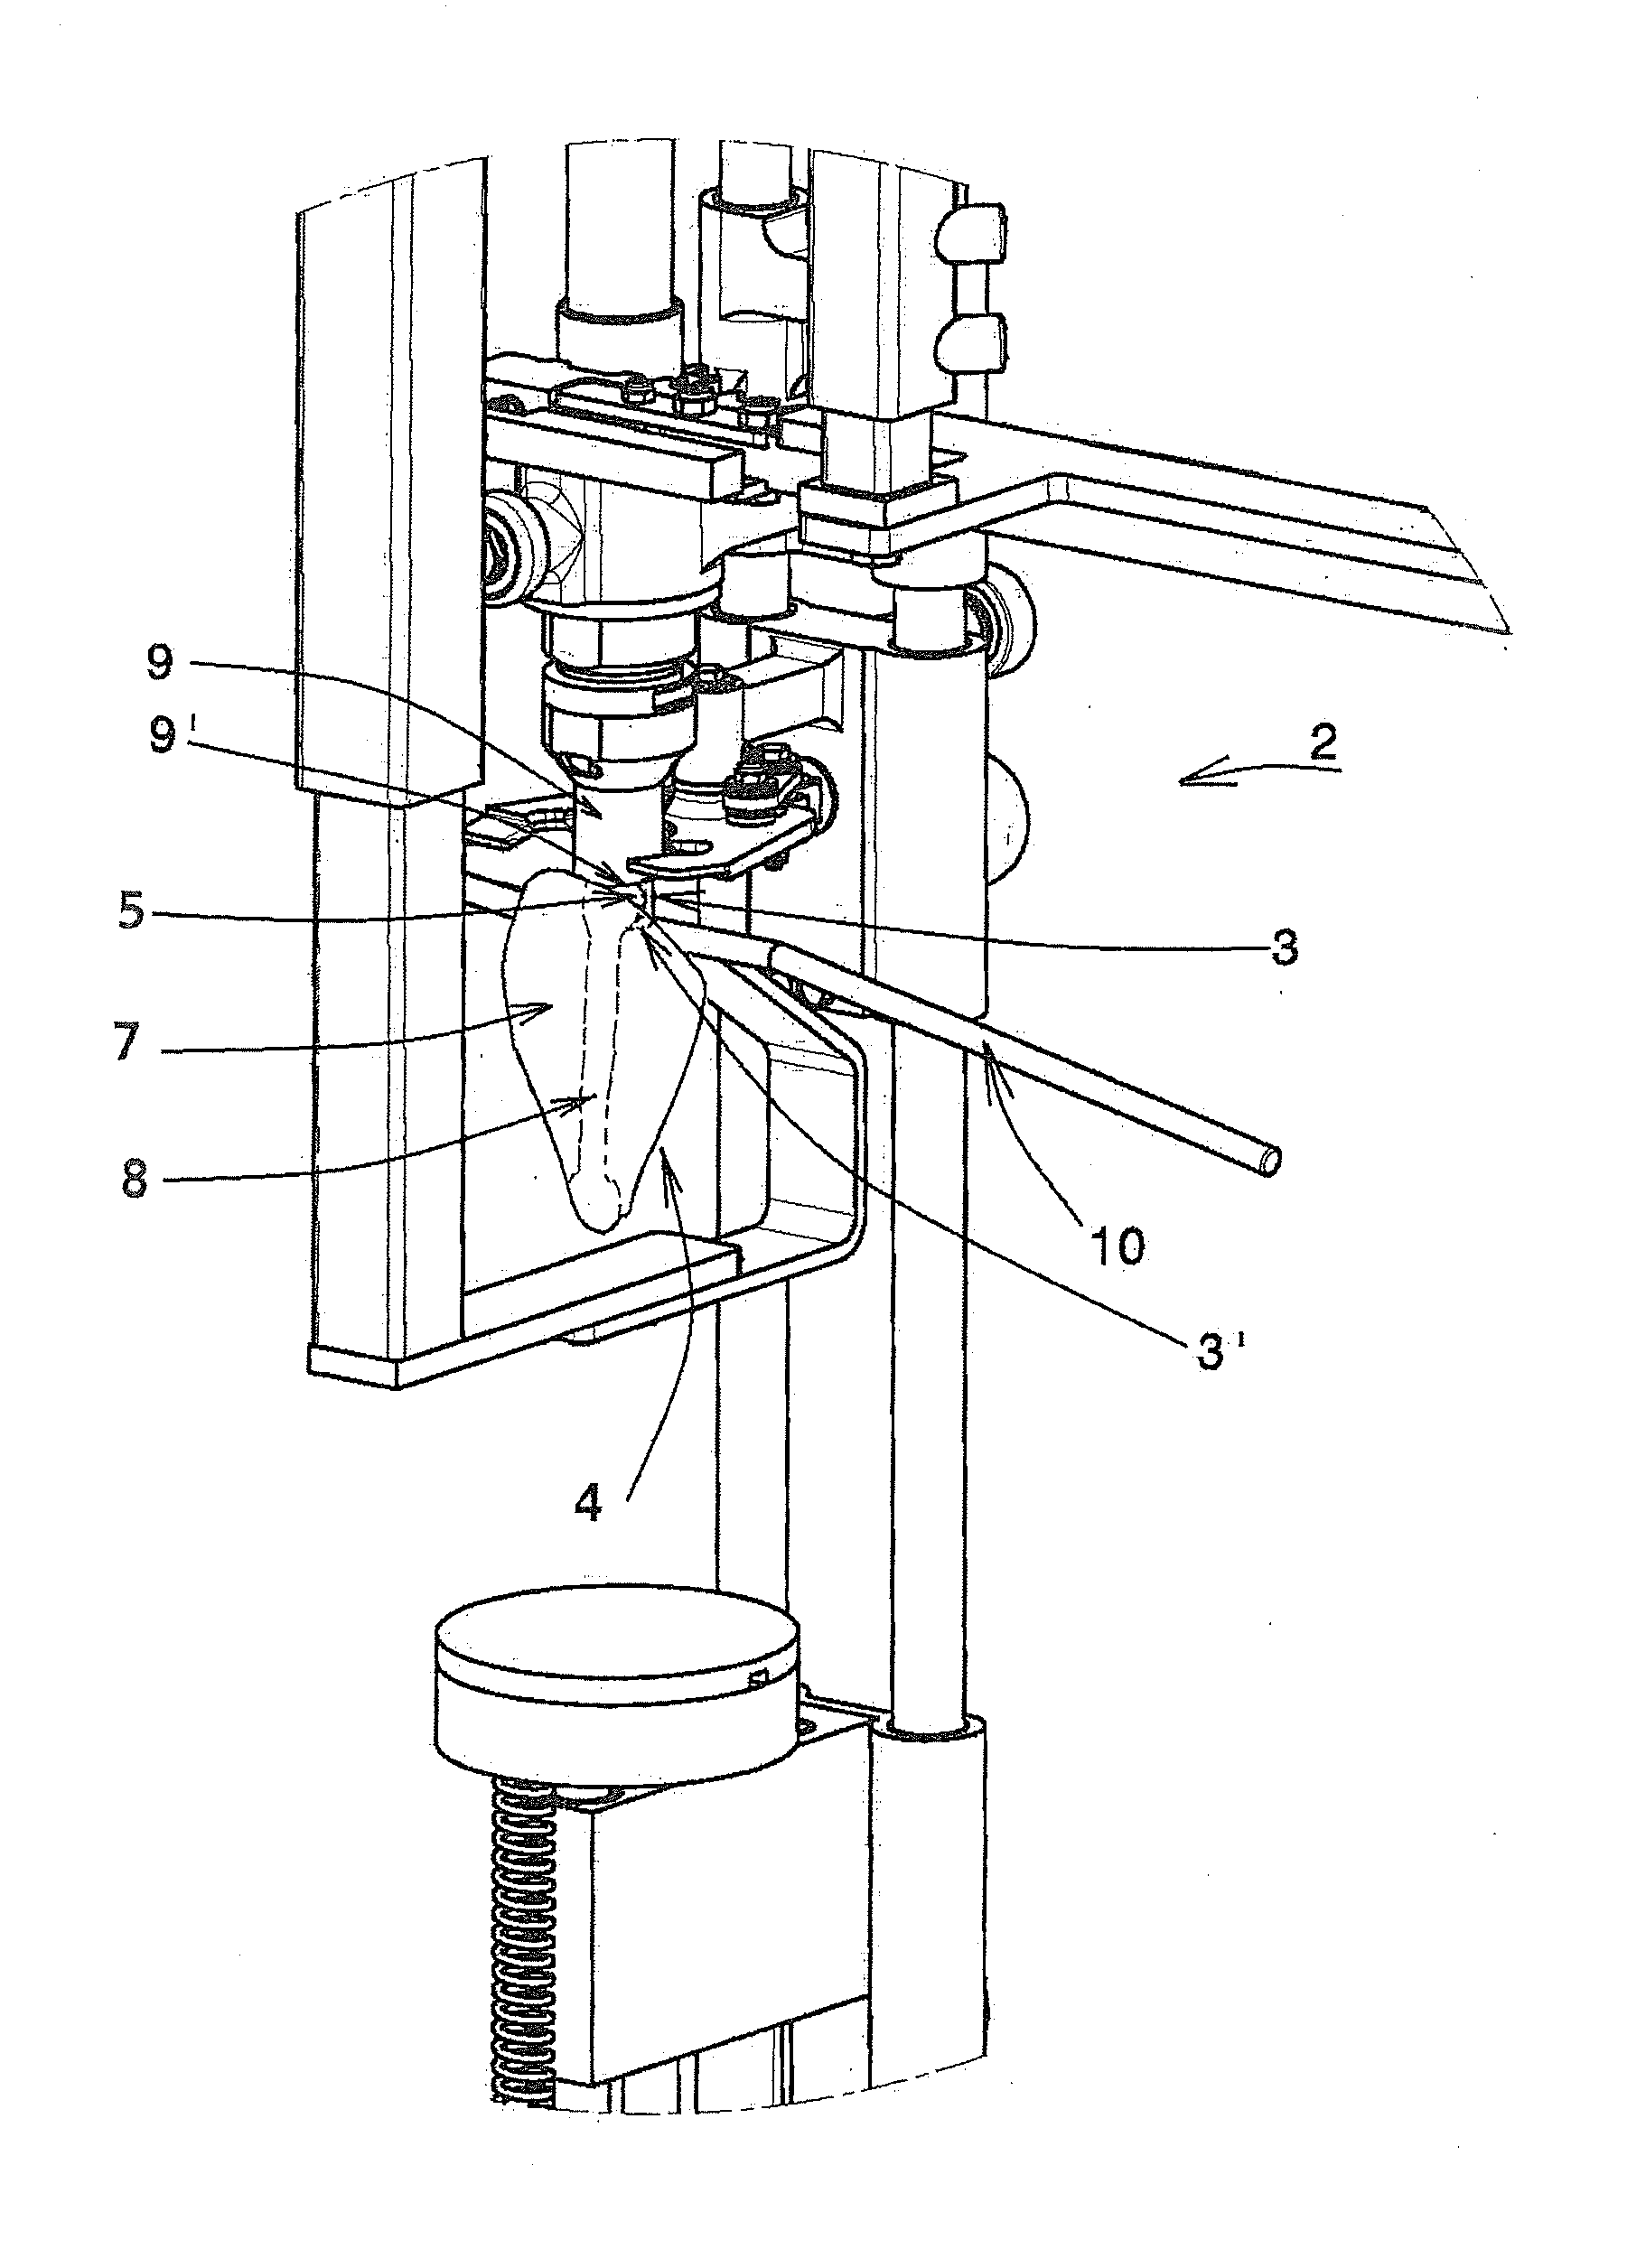 Method and apparatus for harvesting thigh meat and oyster meat from a poultry thigh